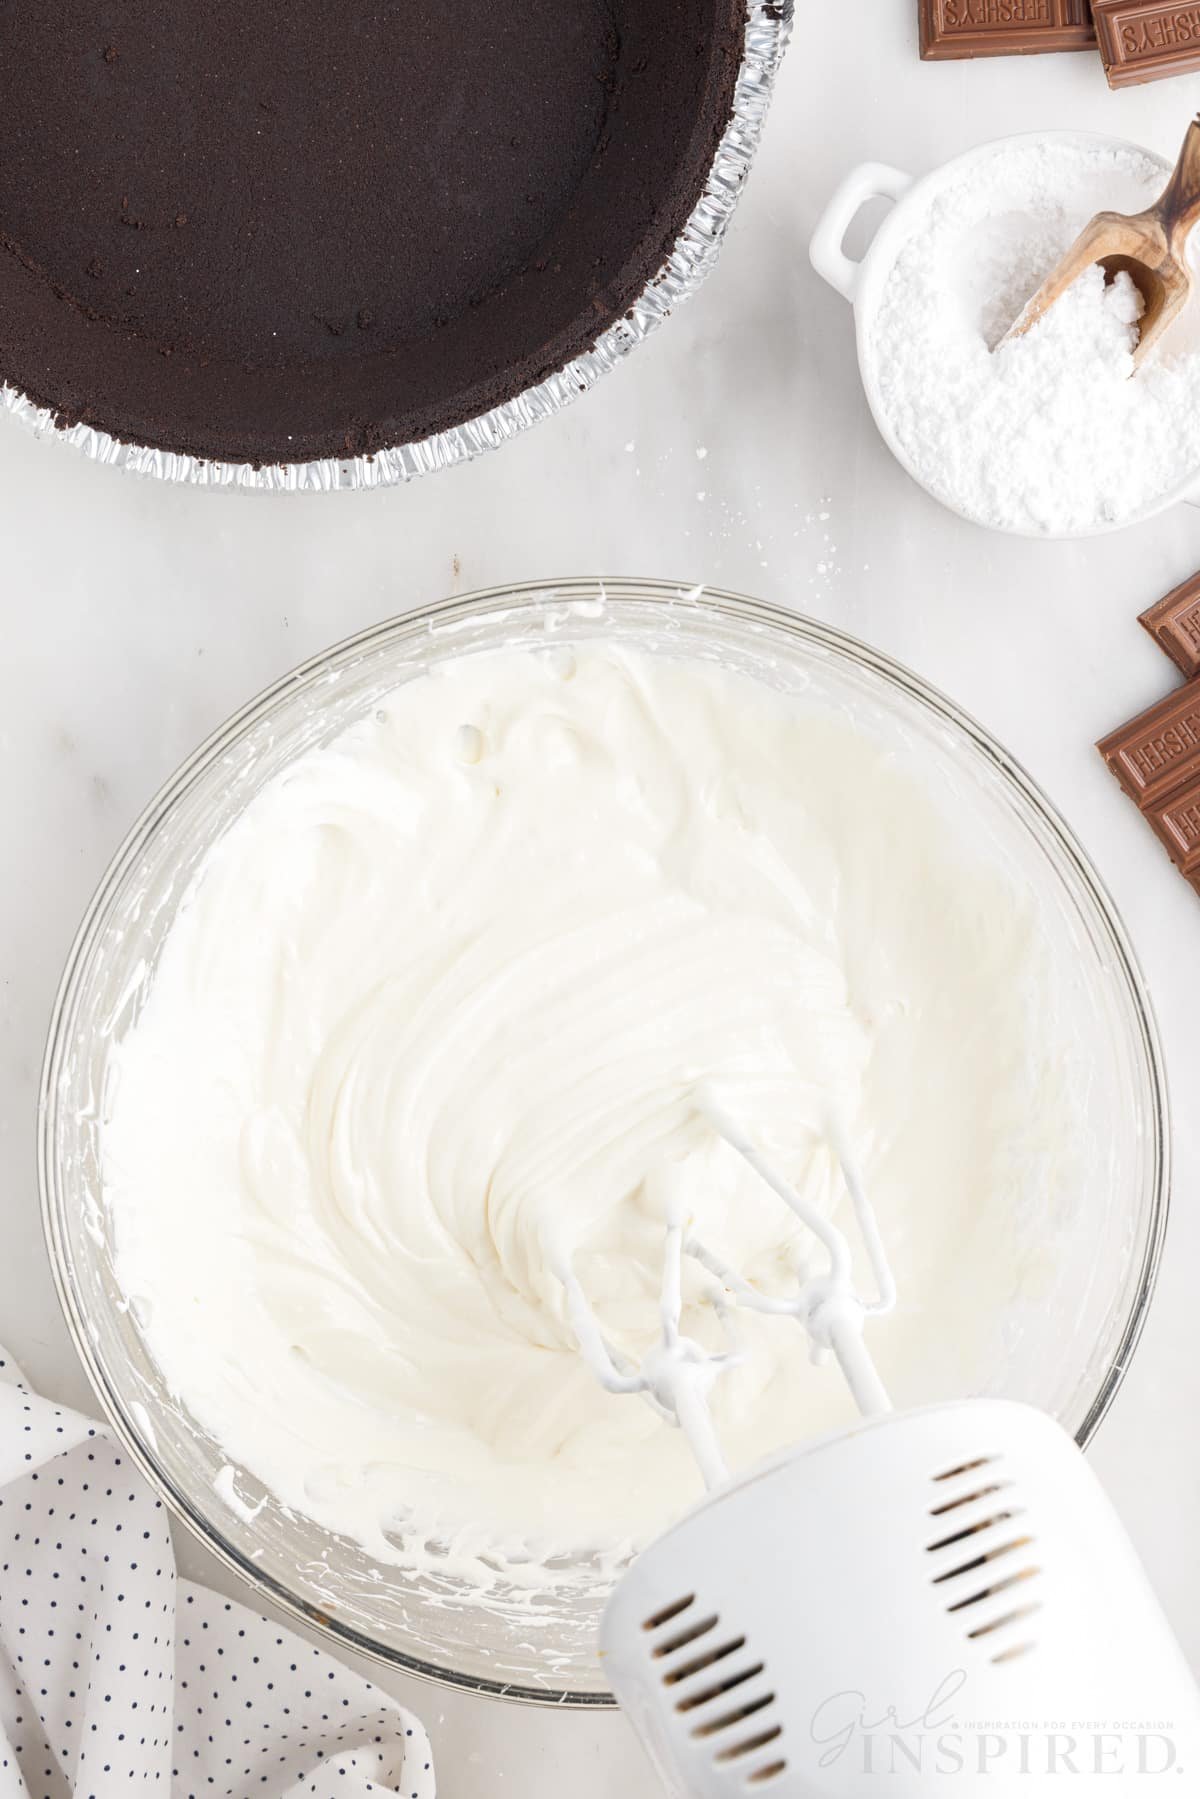 Cream cheese mixture mixed in a bowl with a hand mixer.